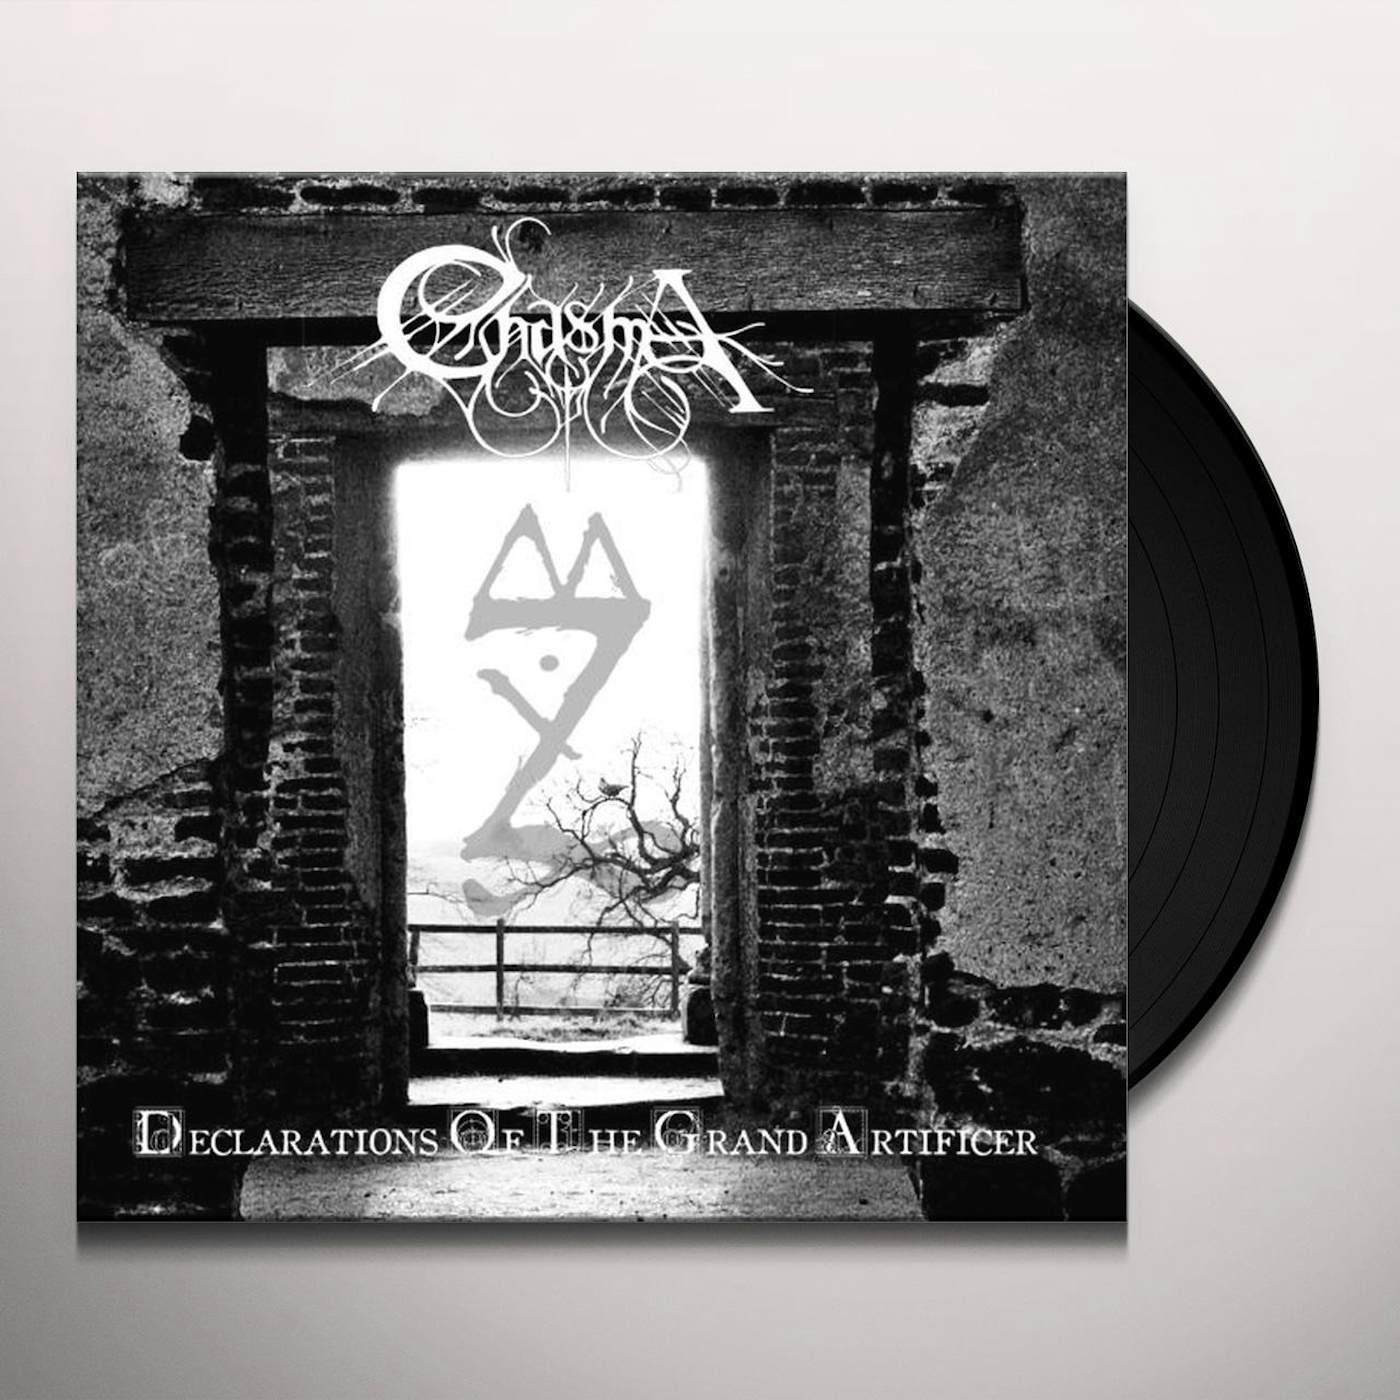 Chasma Declarations of the Grand Artificer Vinyl Record